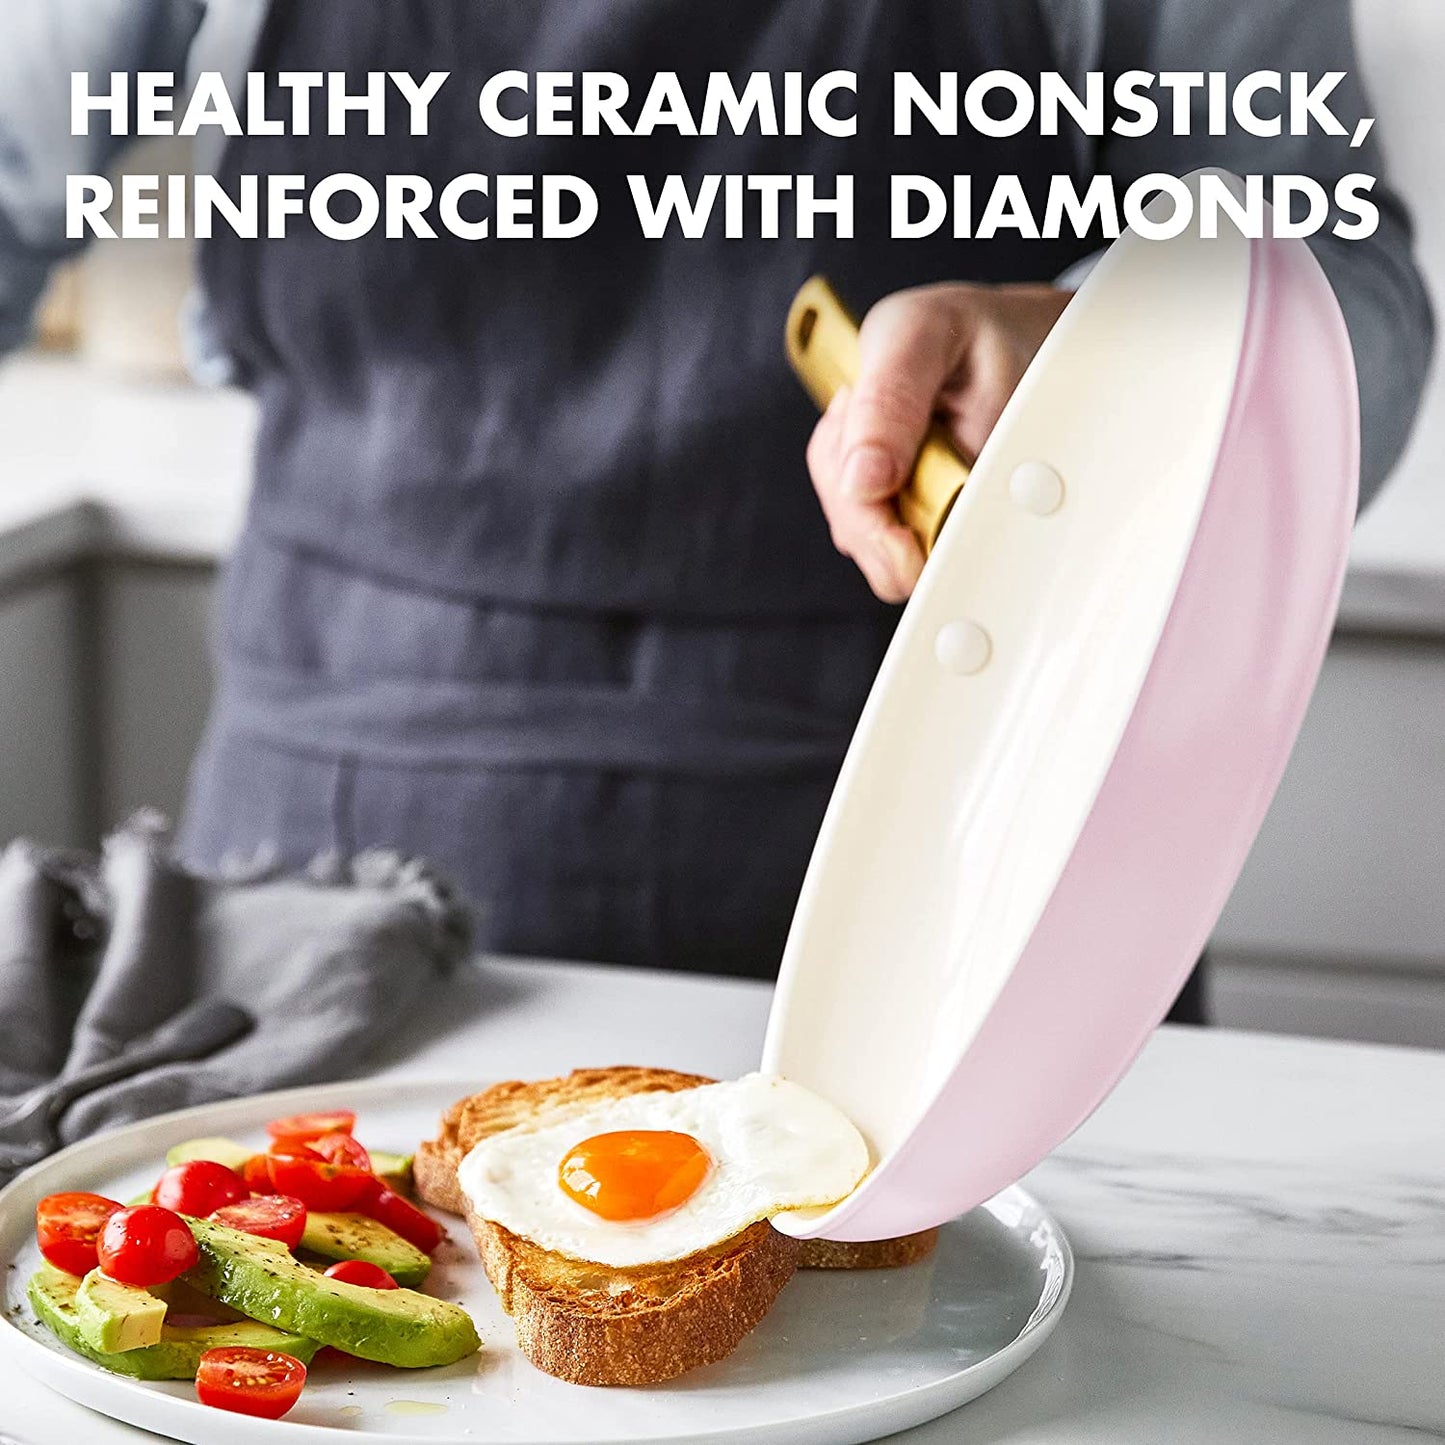 A chef is sliding a fried egg out of a pink pan onto a slice of bread with some avocado and tomato on the side.